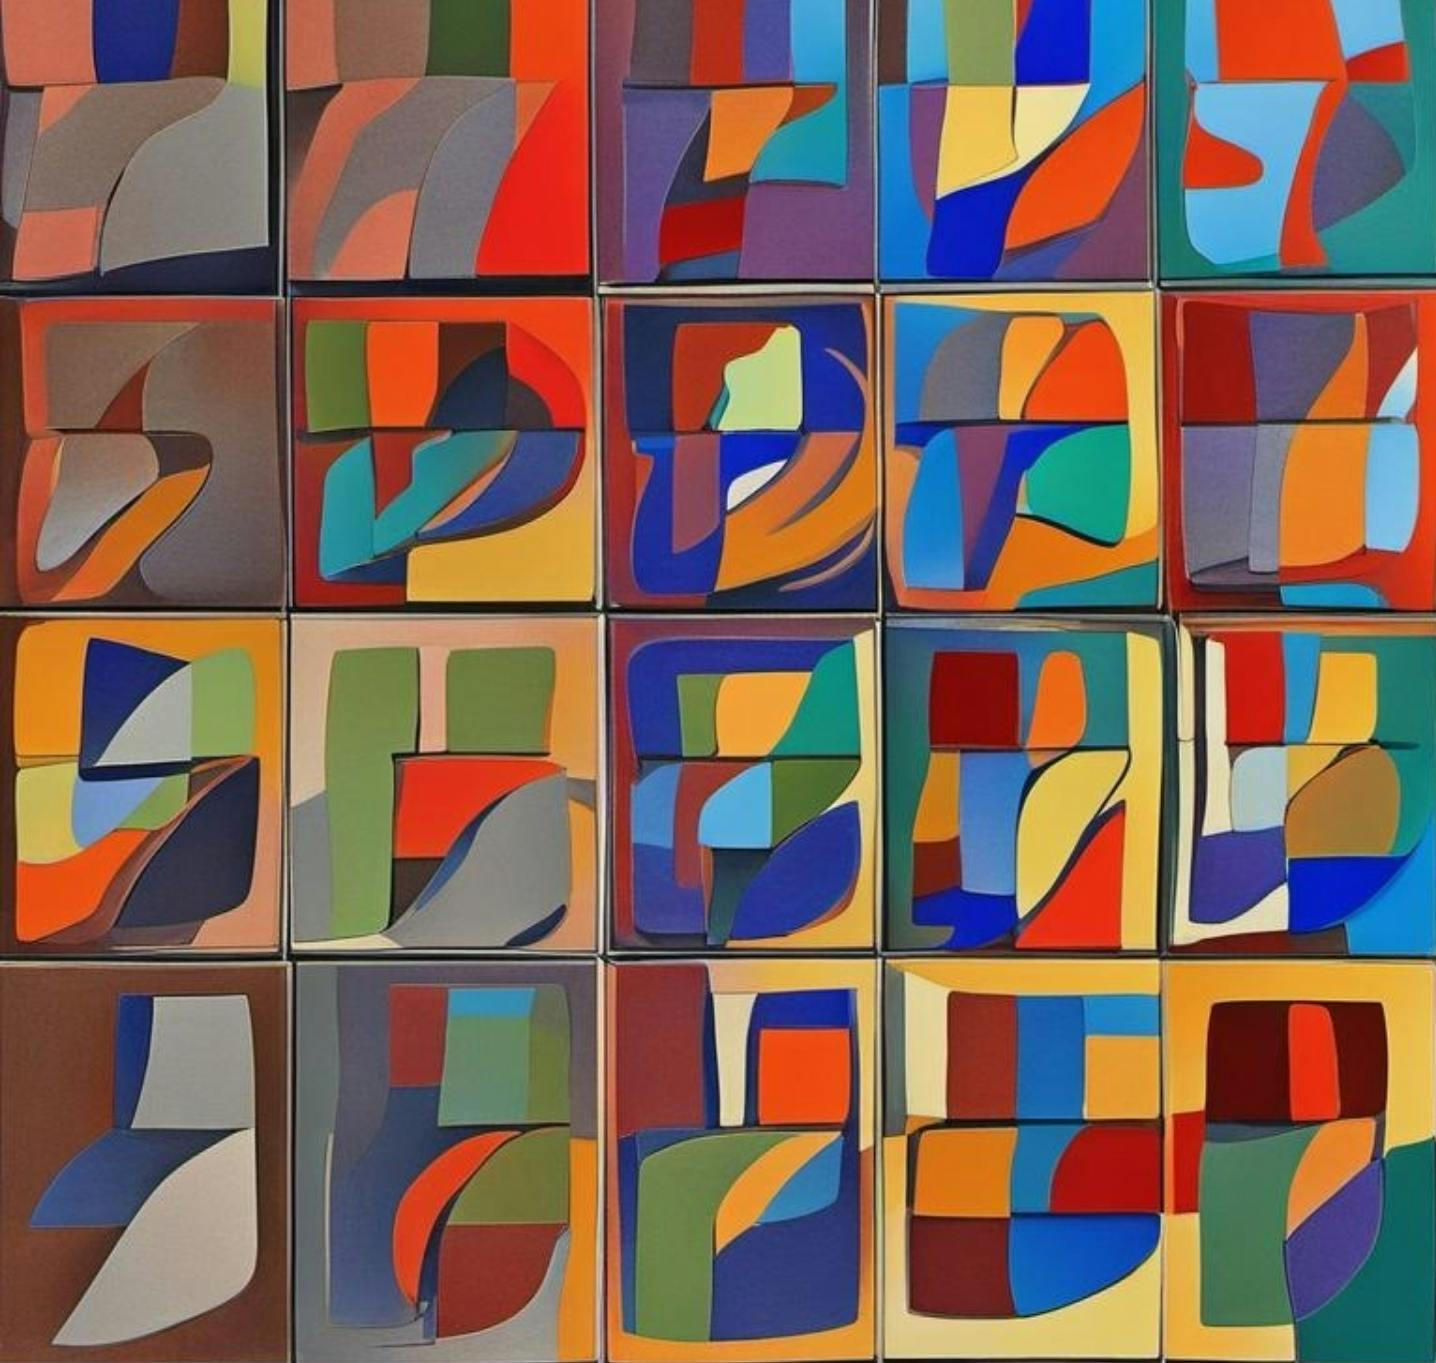 Harold Cohen: A pioneer in AI-generated art, Harold Cohen's AARON program reshaped creativity through algorithms and color.